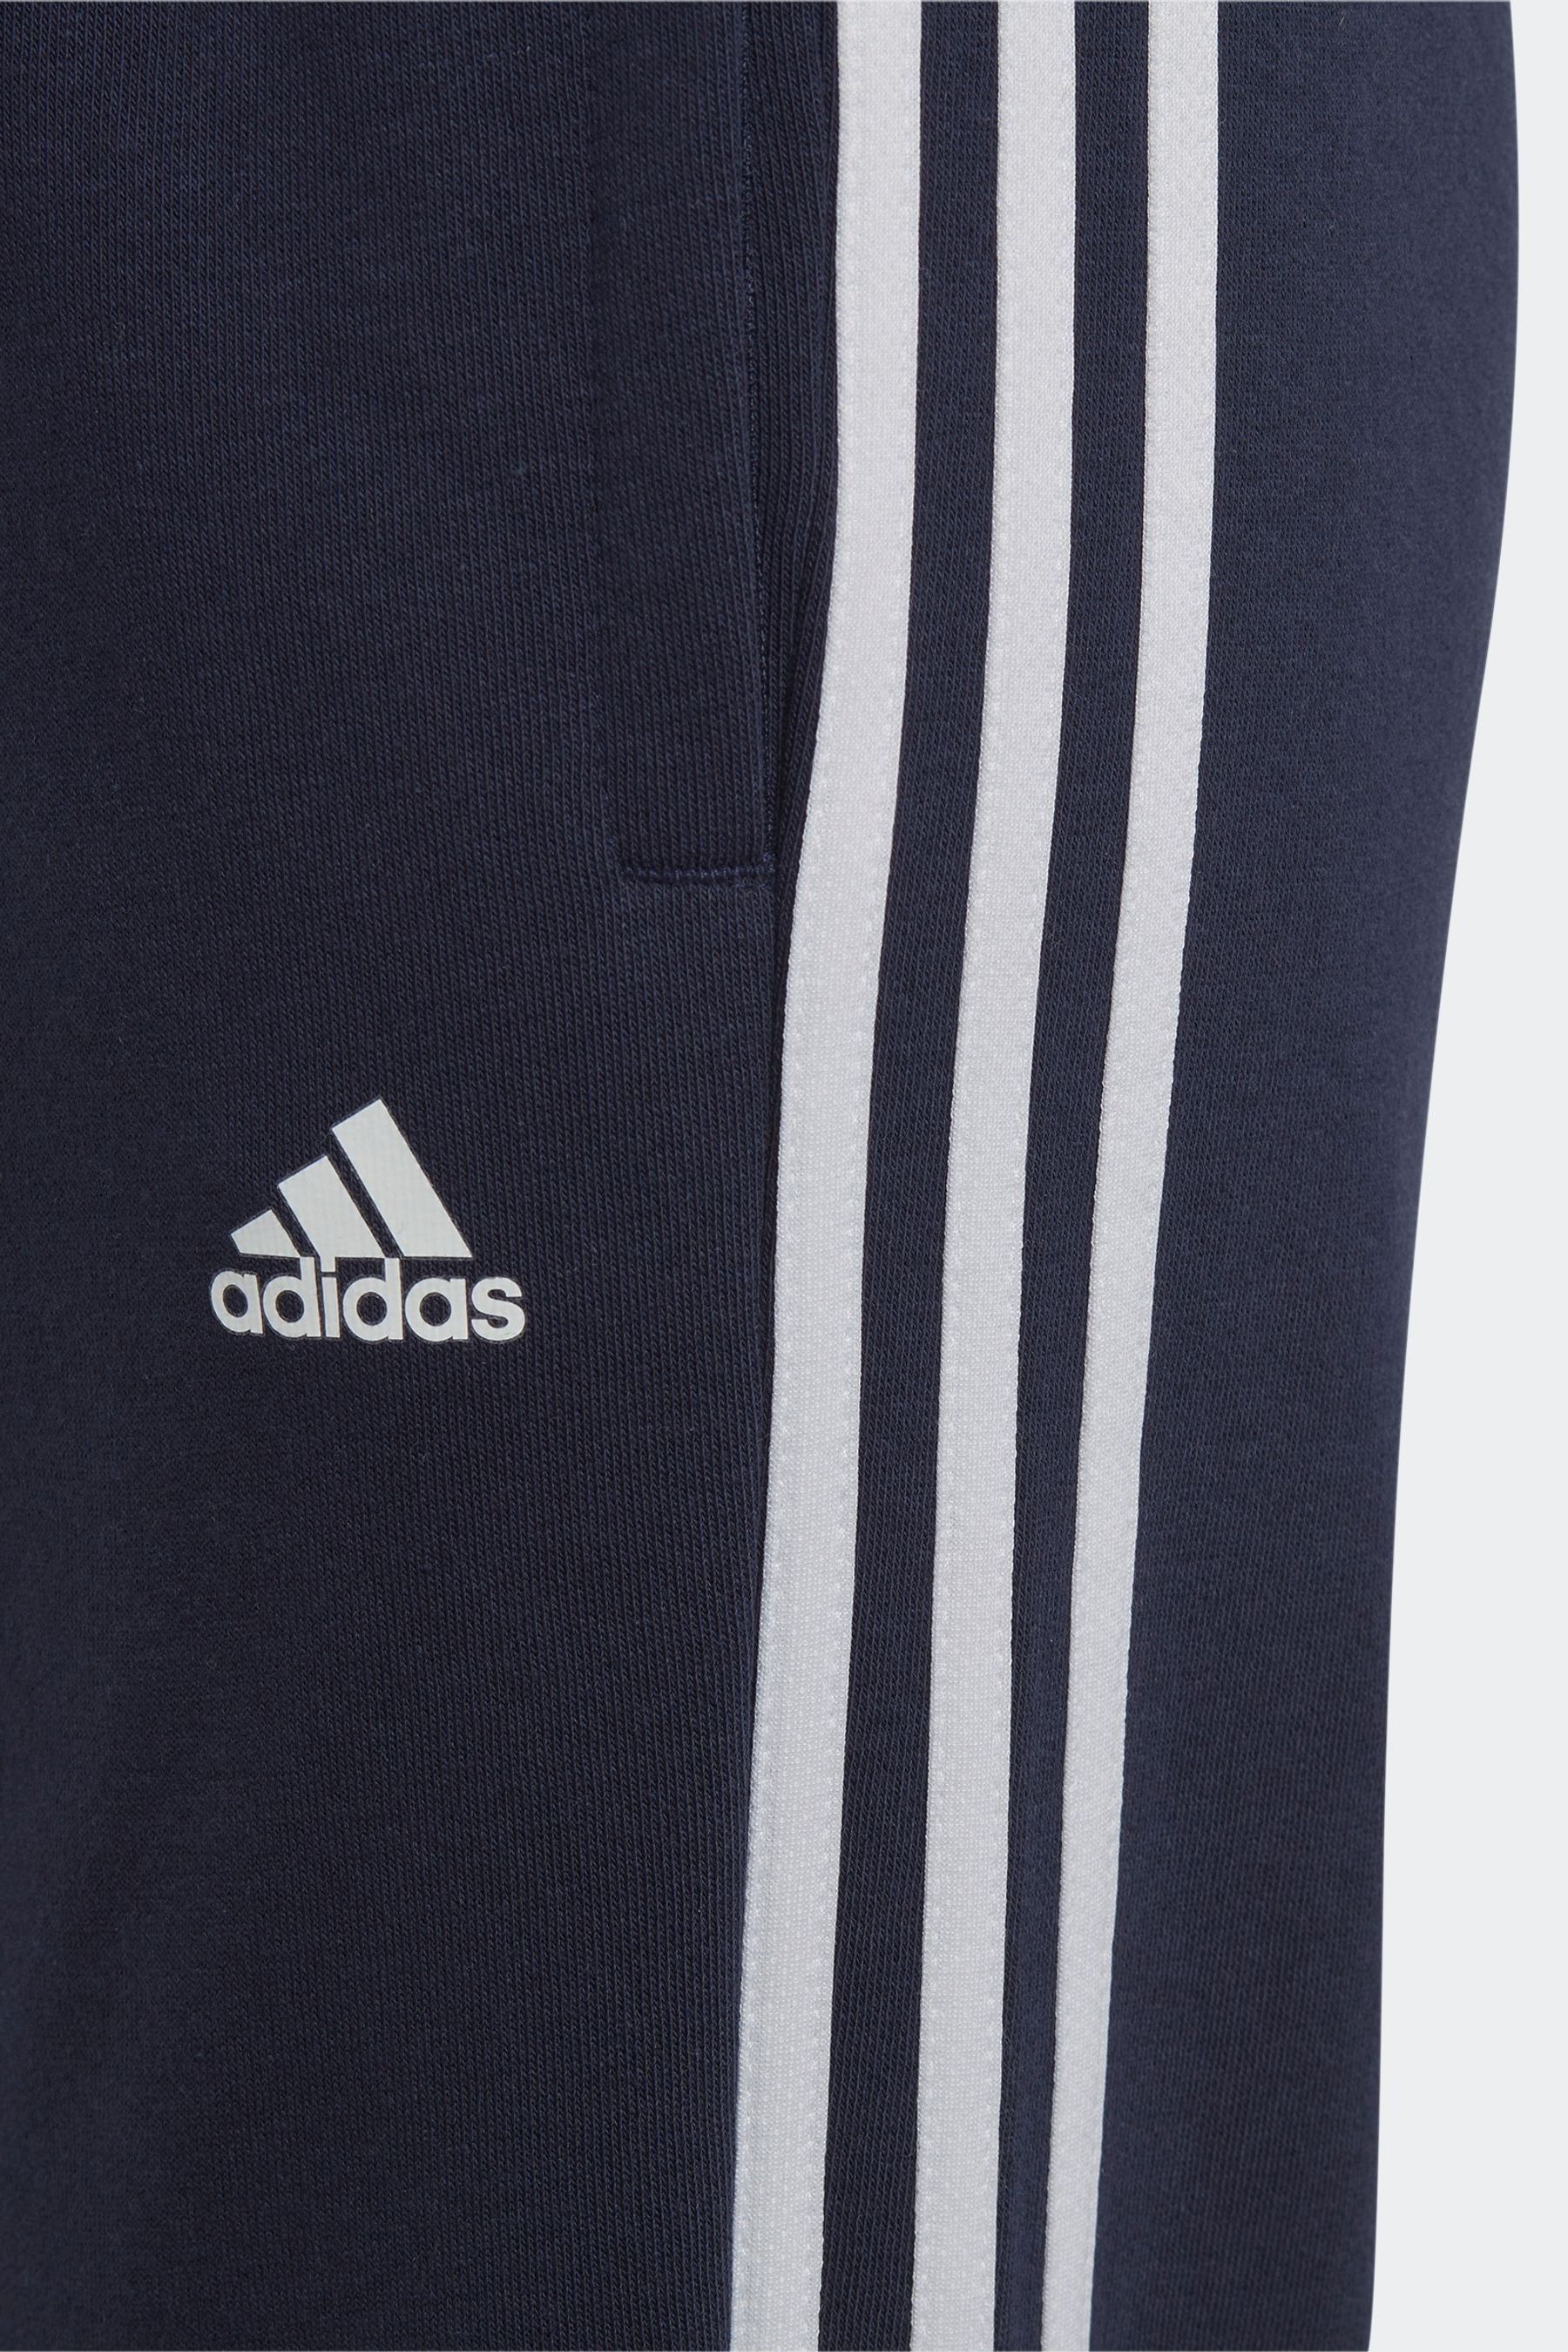 Buy adidas Joggers from the Next UK online shop